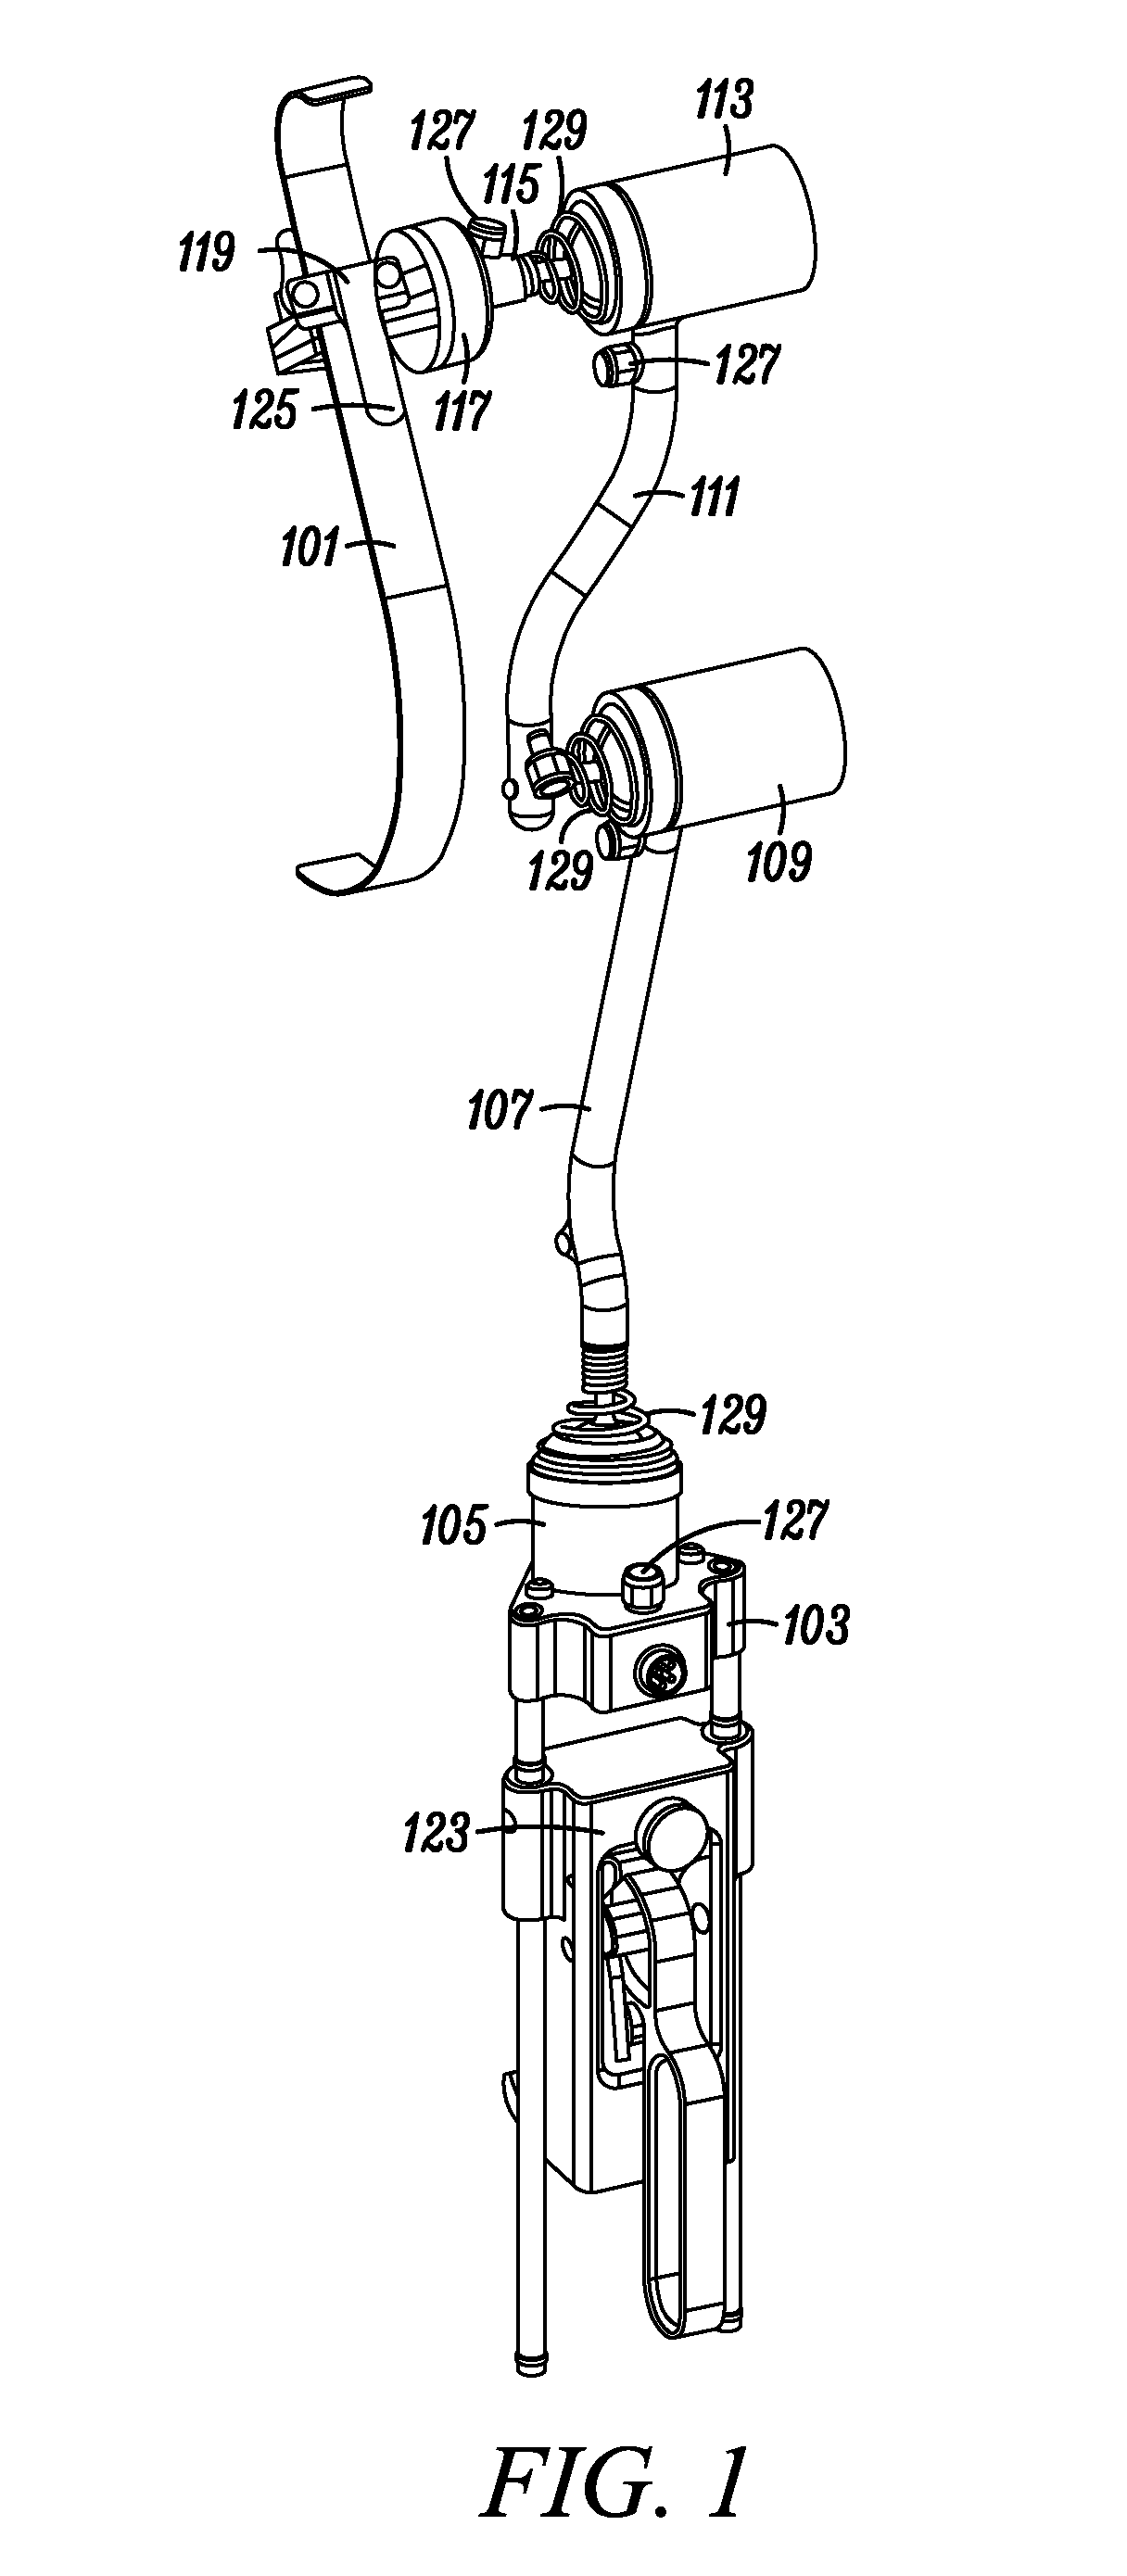 Multi-joint fixture system